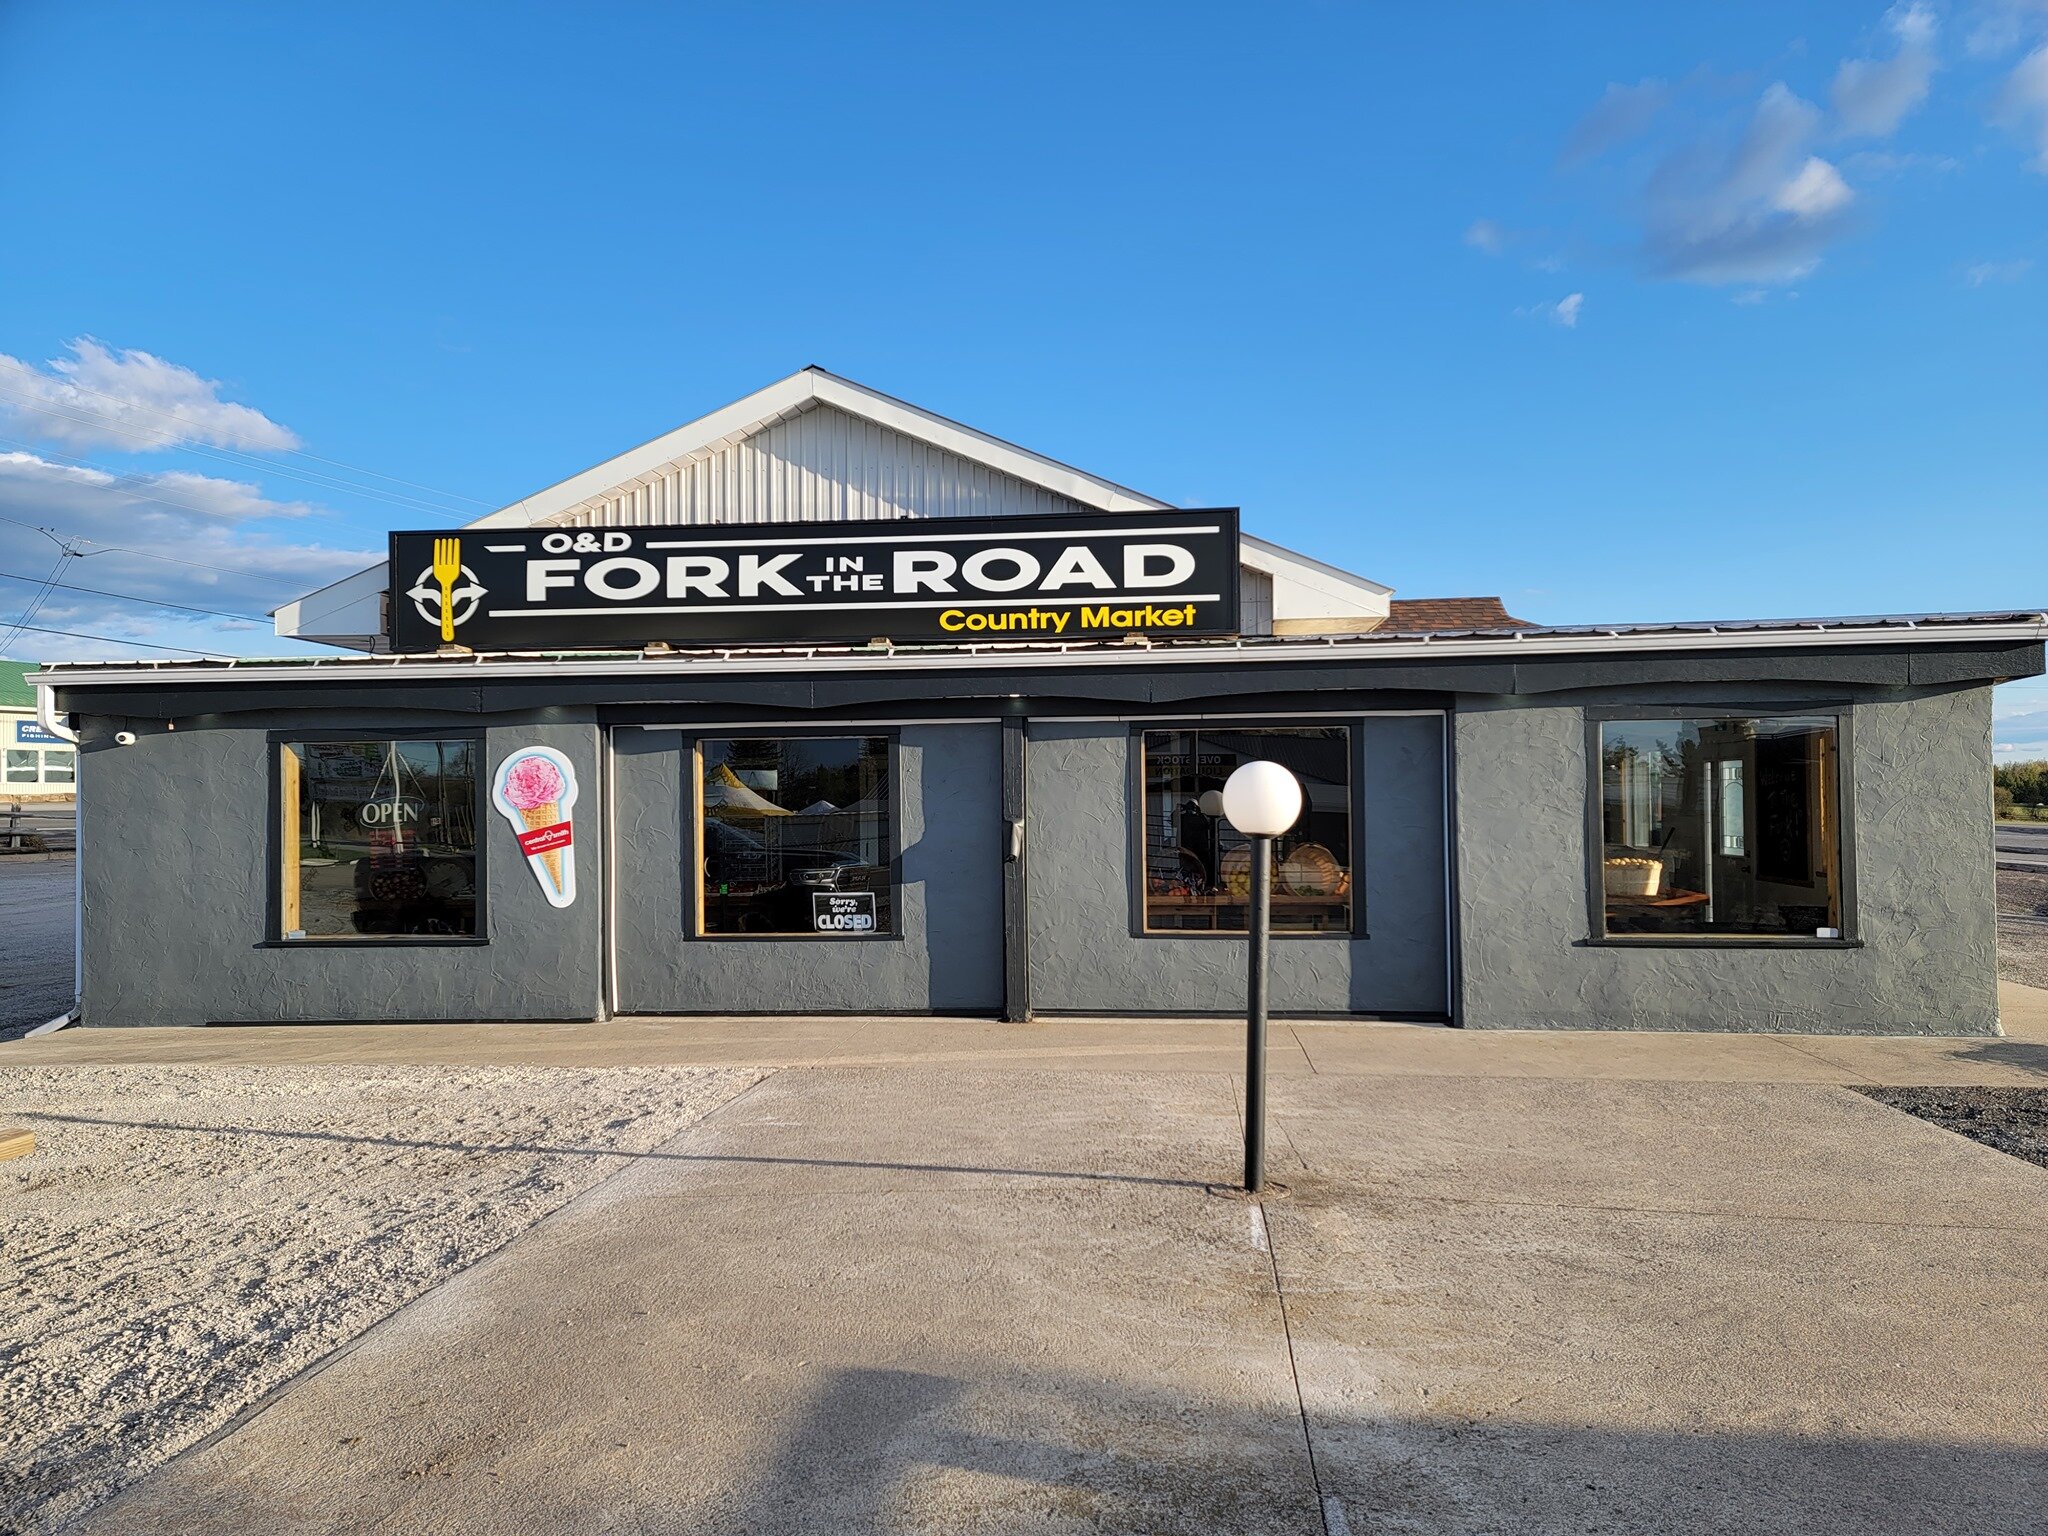 Fork in the road exterior.jpg